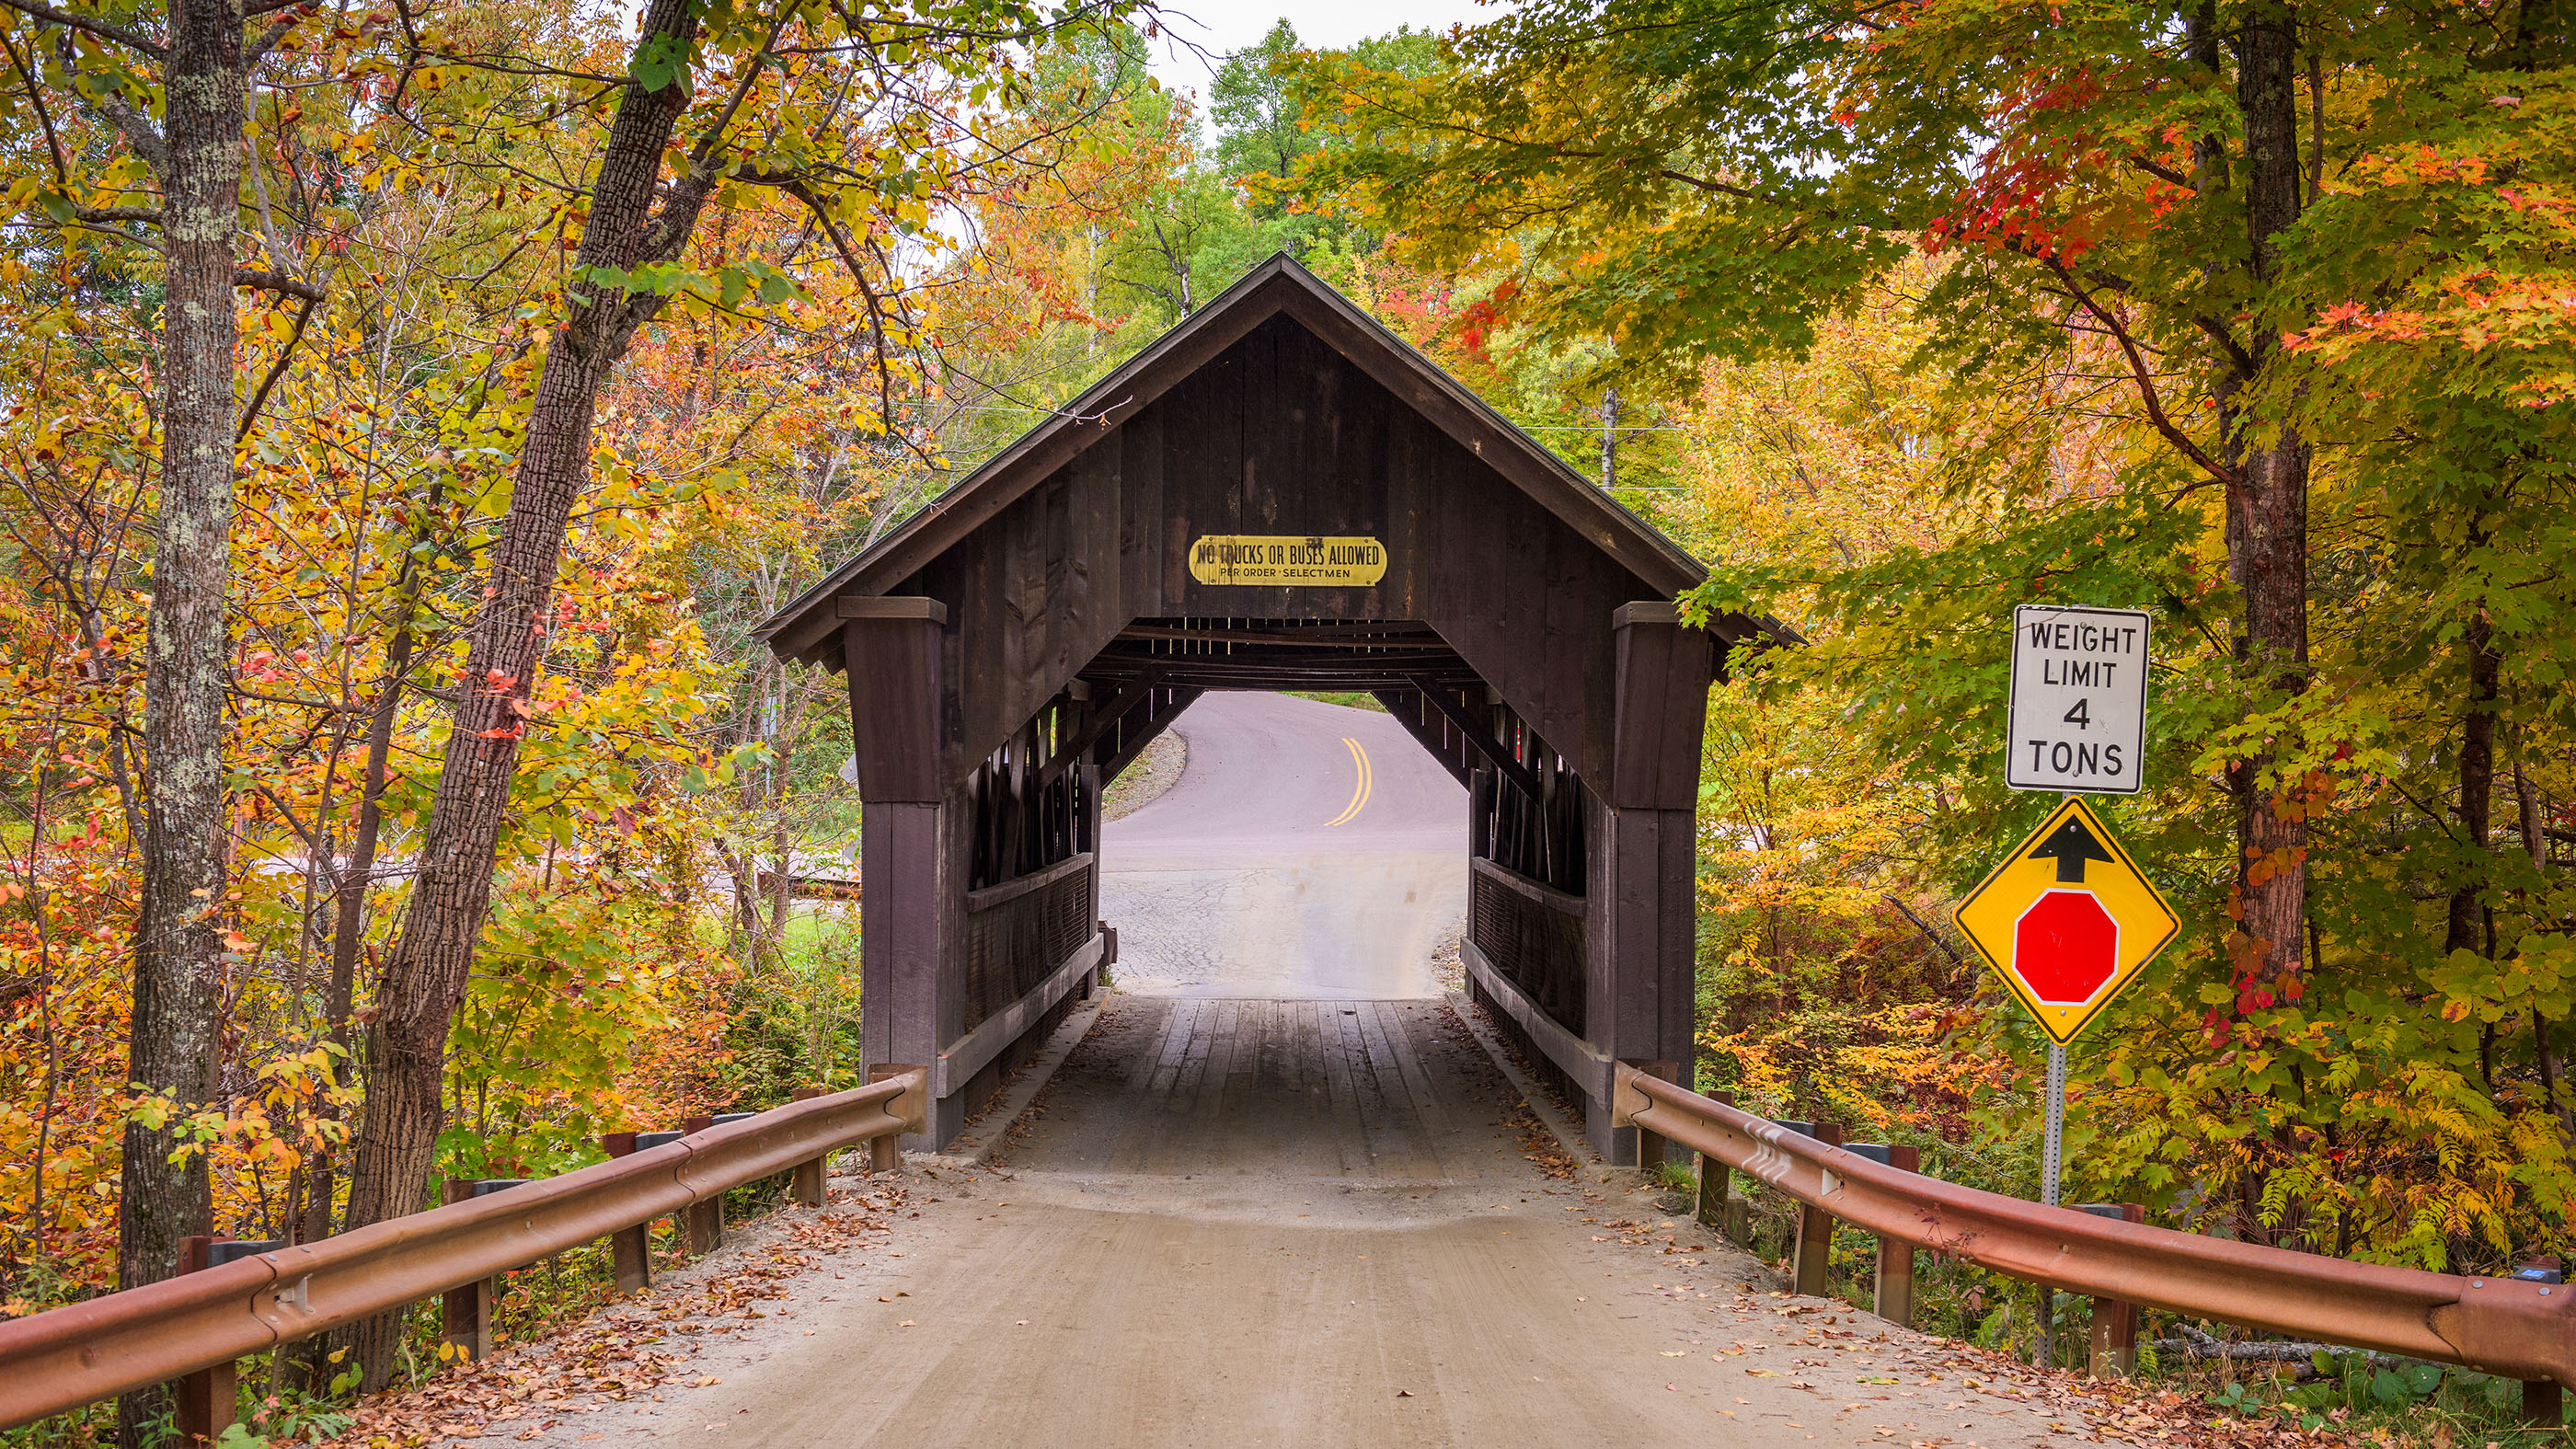 Emily's Bridge in Stowe, Vermont, is said to be haunted.